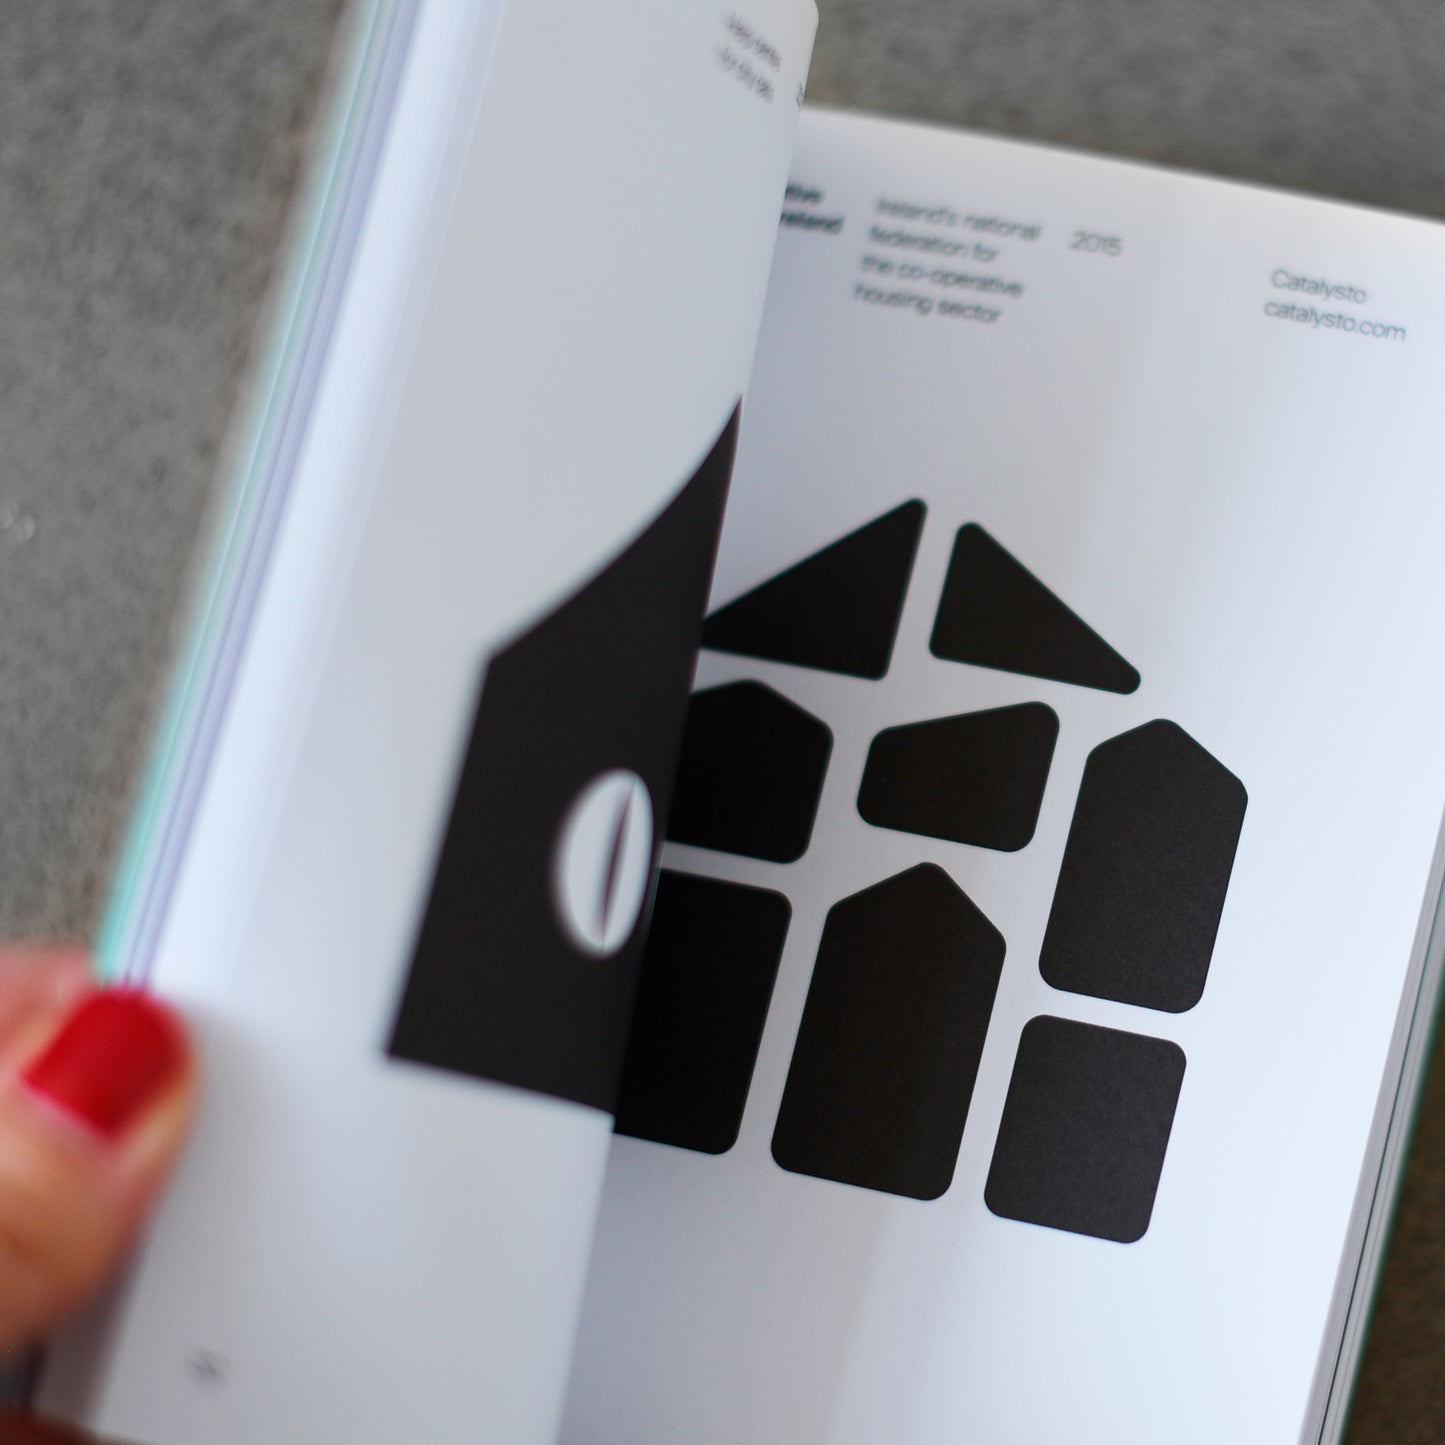 Architectural Logos: A Handbook of Architectural Marks Identity